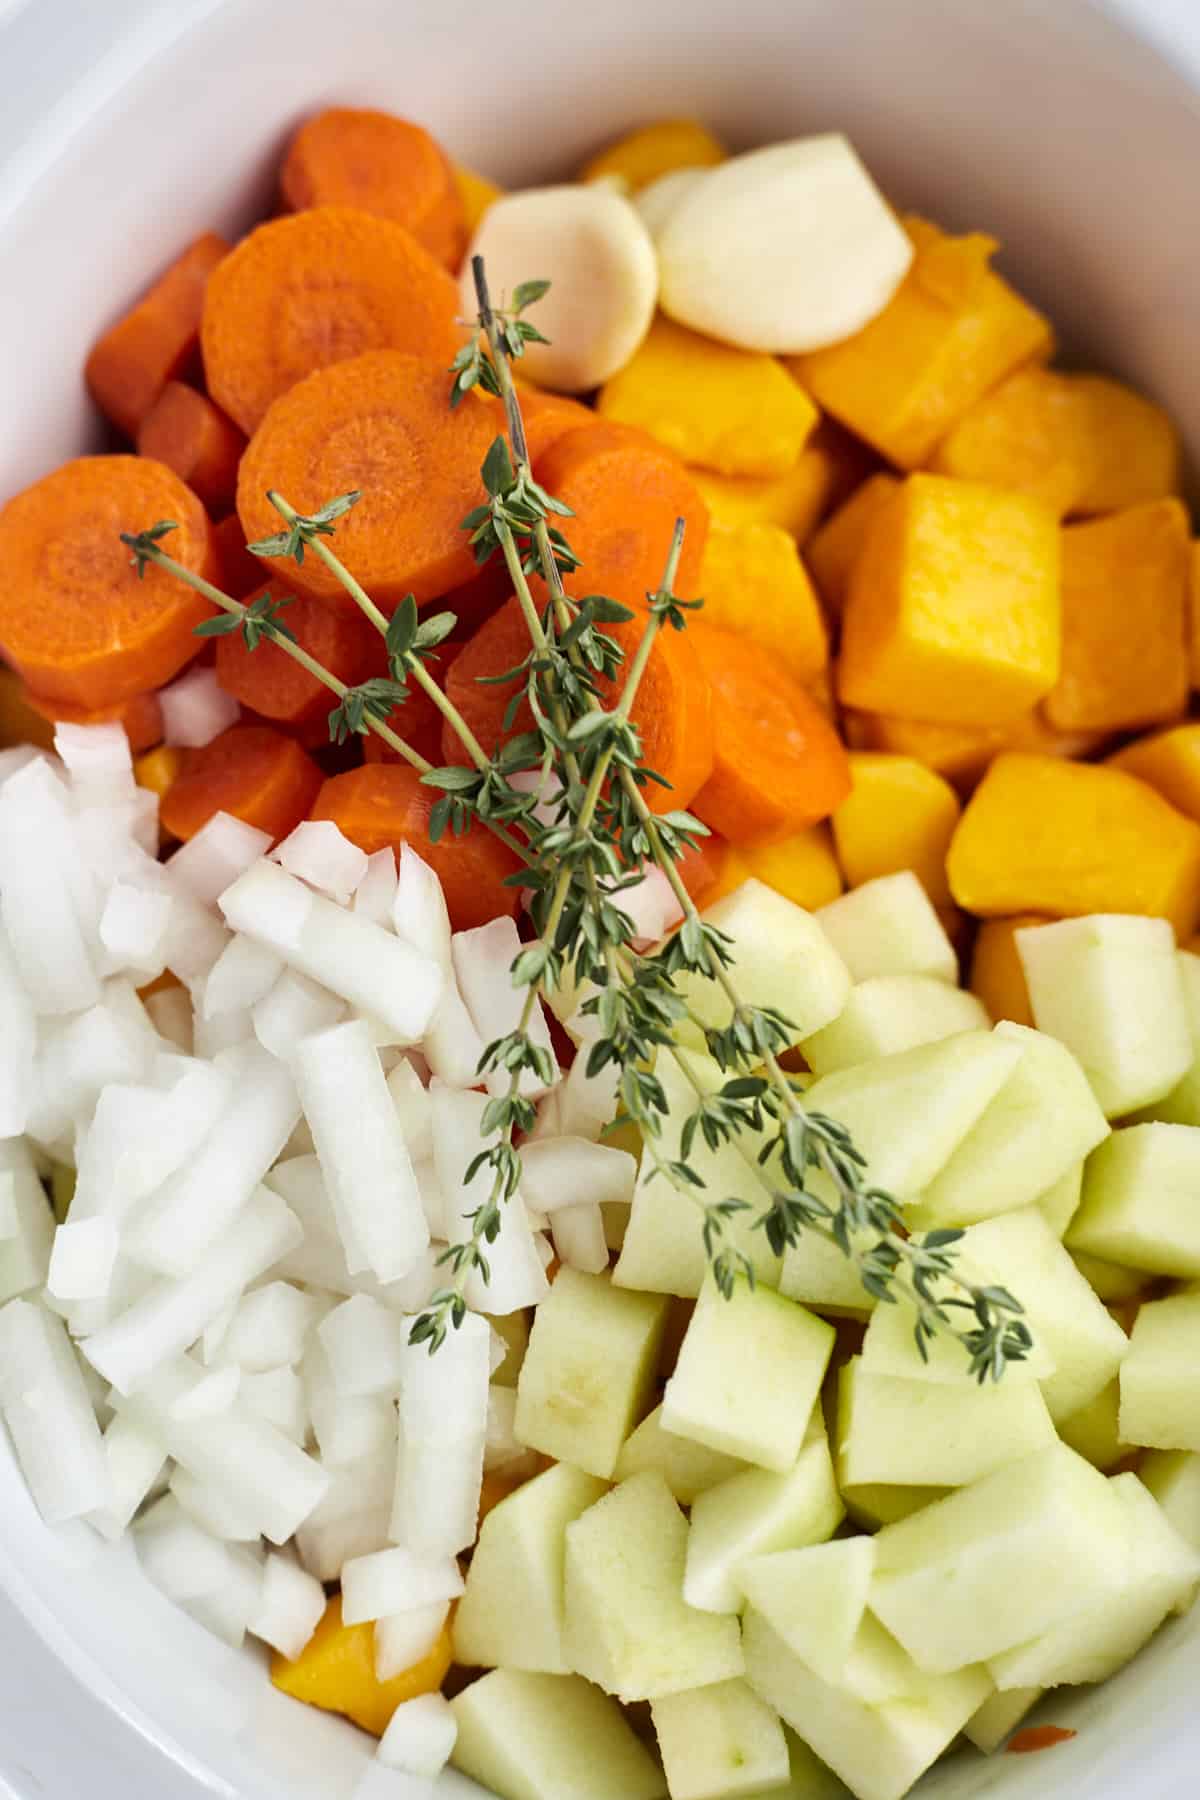 carrots, butternut squash, garlic cloves, diced onion, chopped green apples, and fresh herbs in a slow cooker.